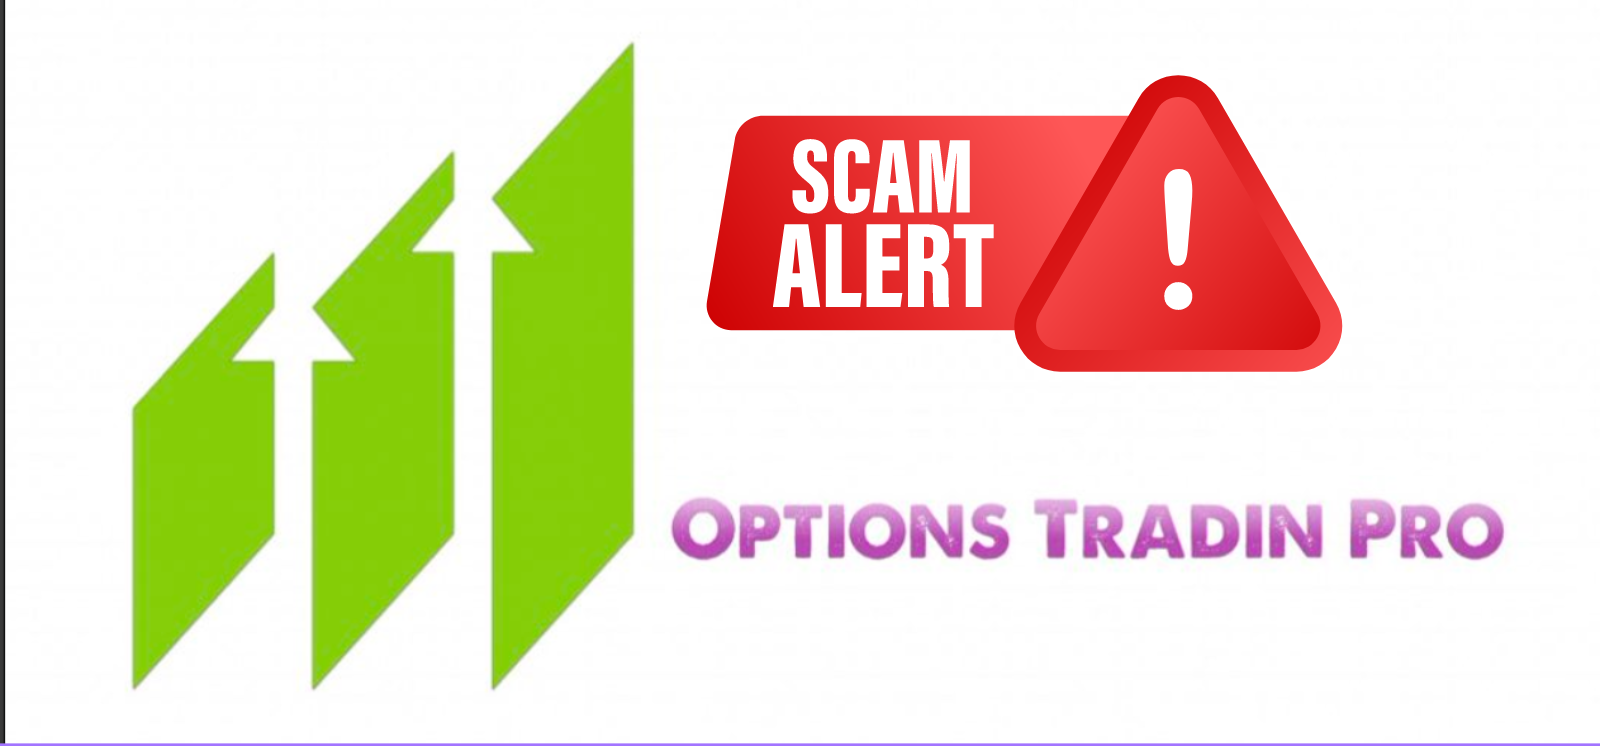 ay Options Trading Pro A Scam